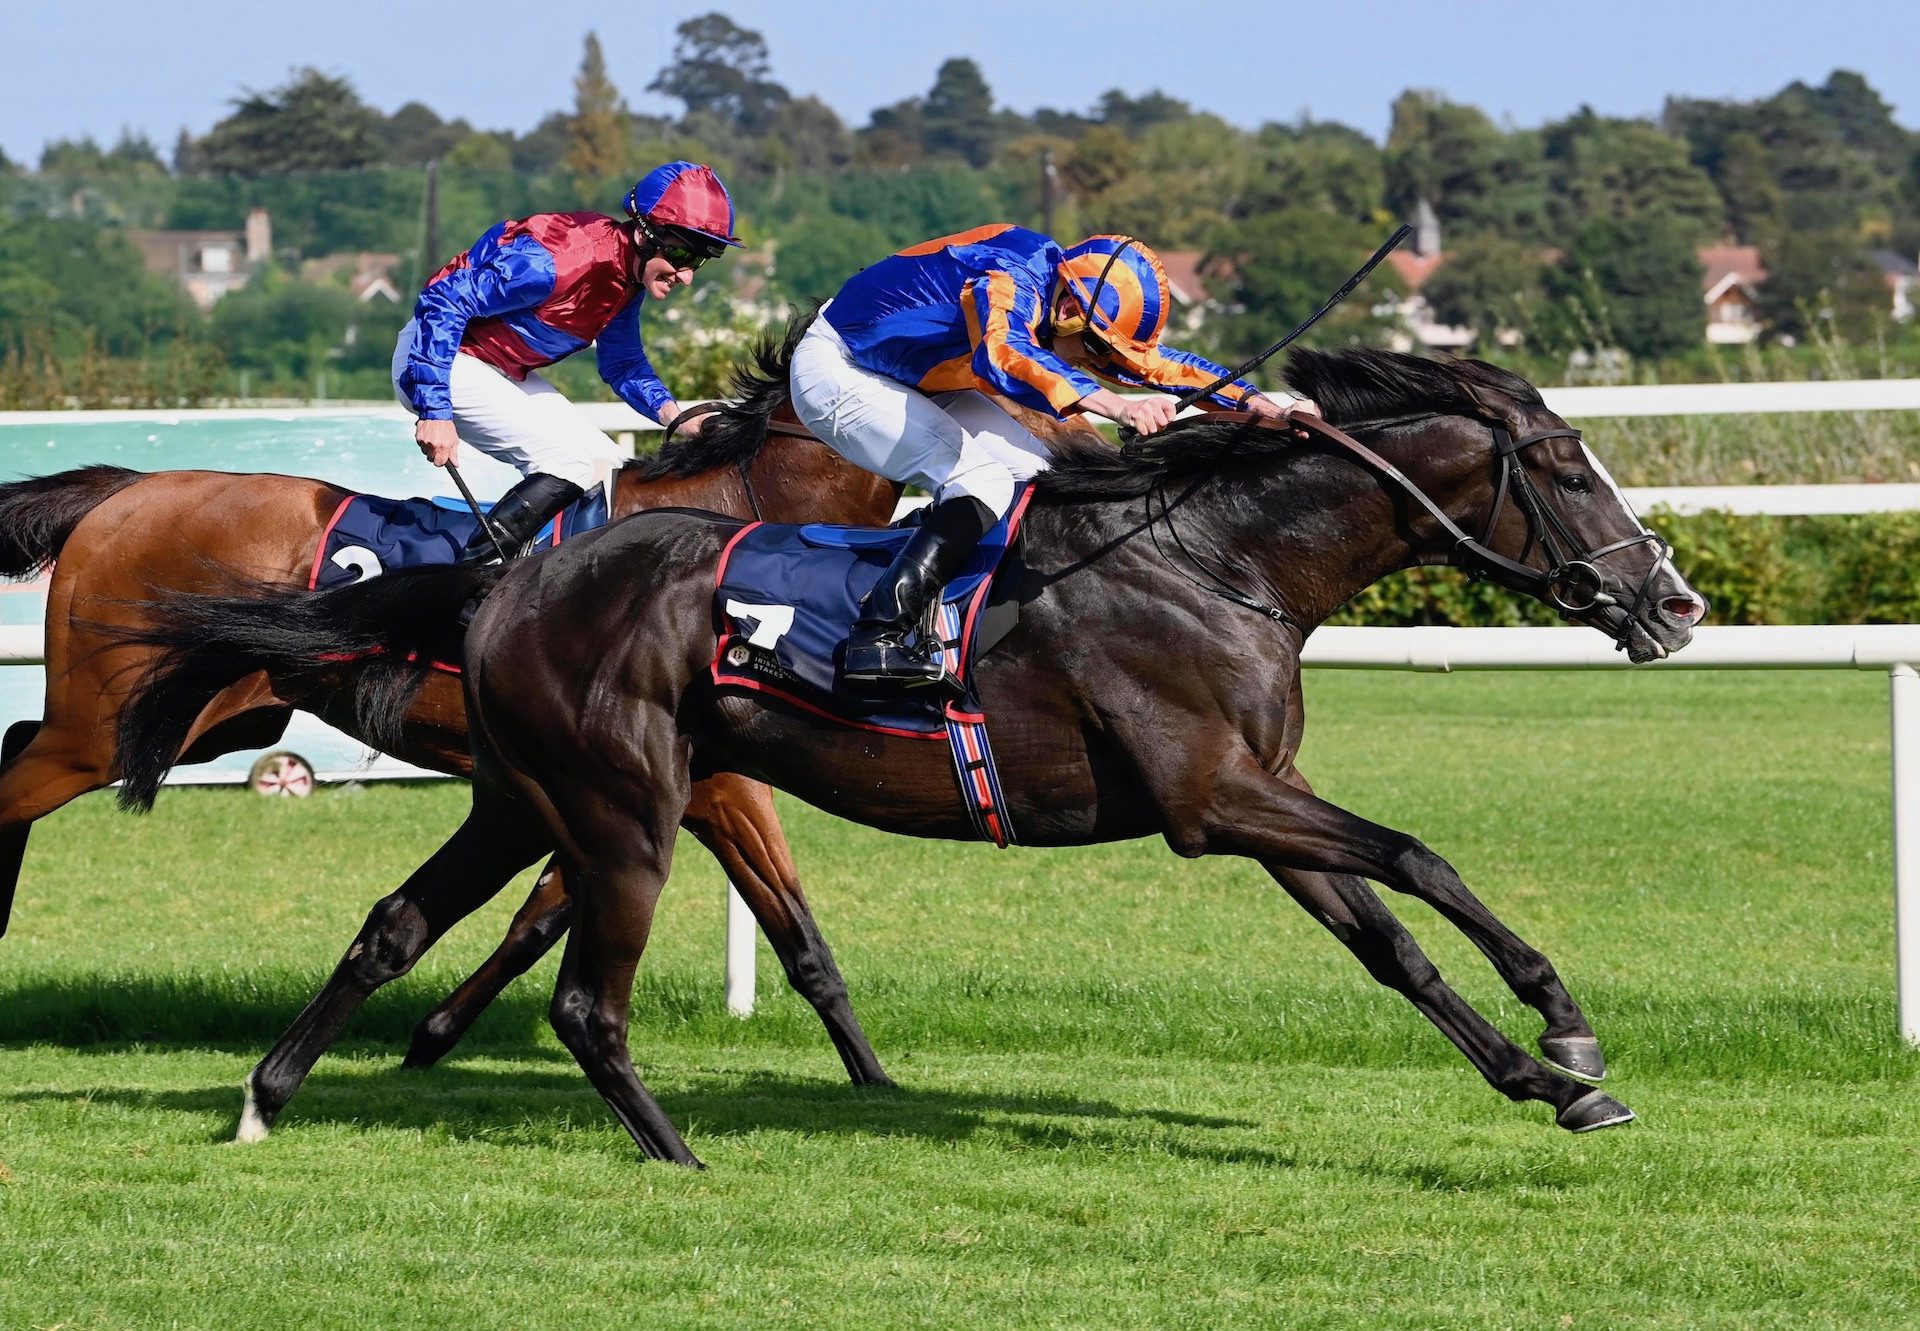 Auguste Rodin Wins The Group 1 Irish Champion Stakes at Leopardstown